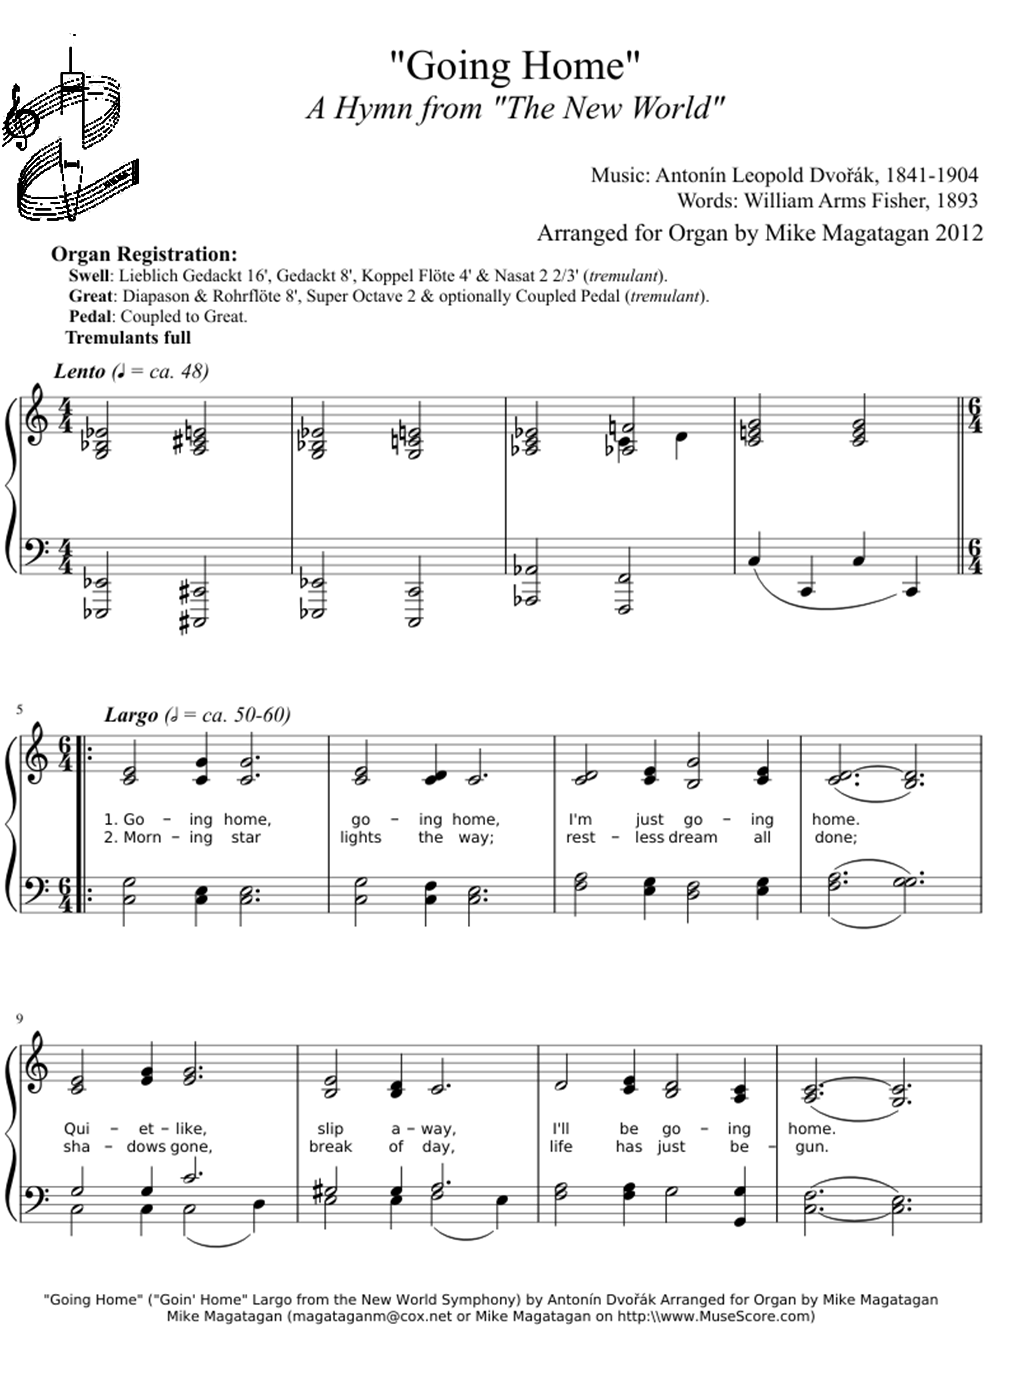 Going home sheet music notes 1